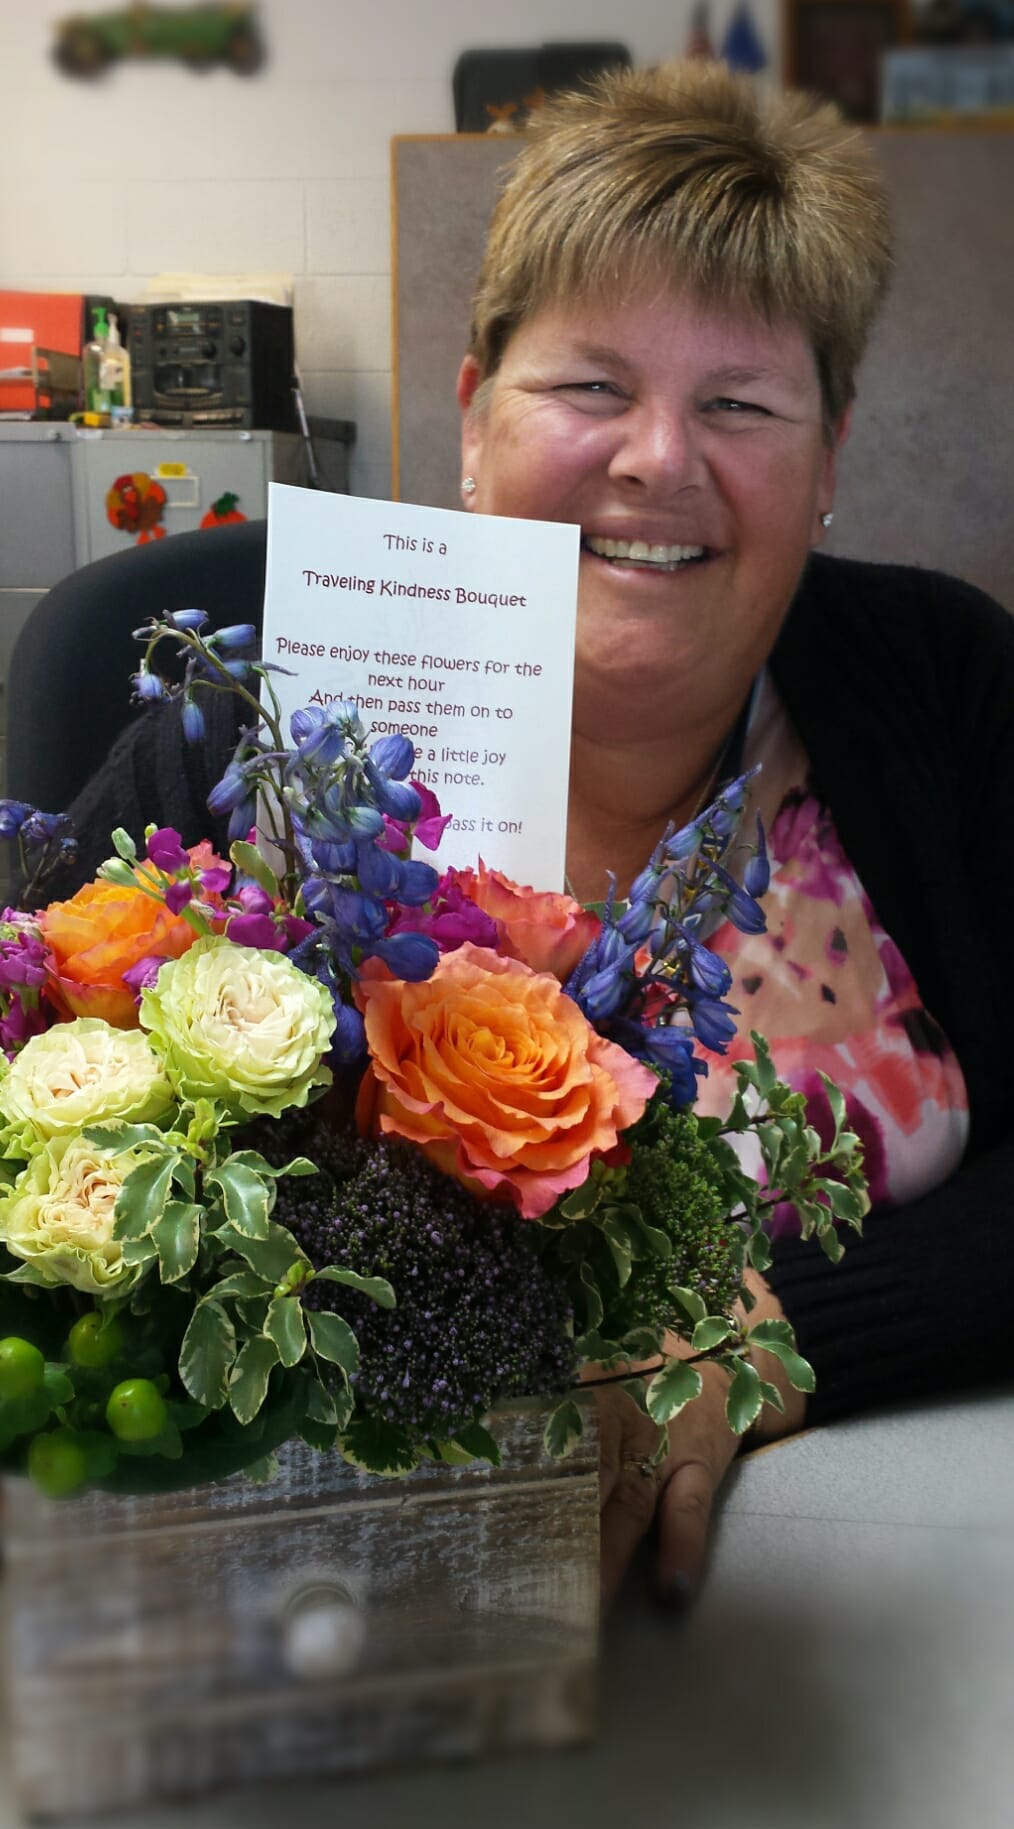 Traveling Kindness Bouquet from Twiggs in Yerington, NV